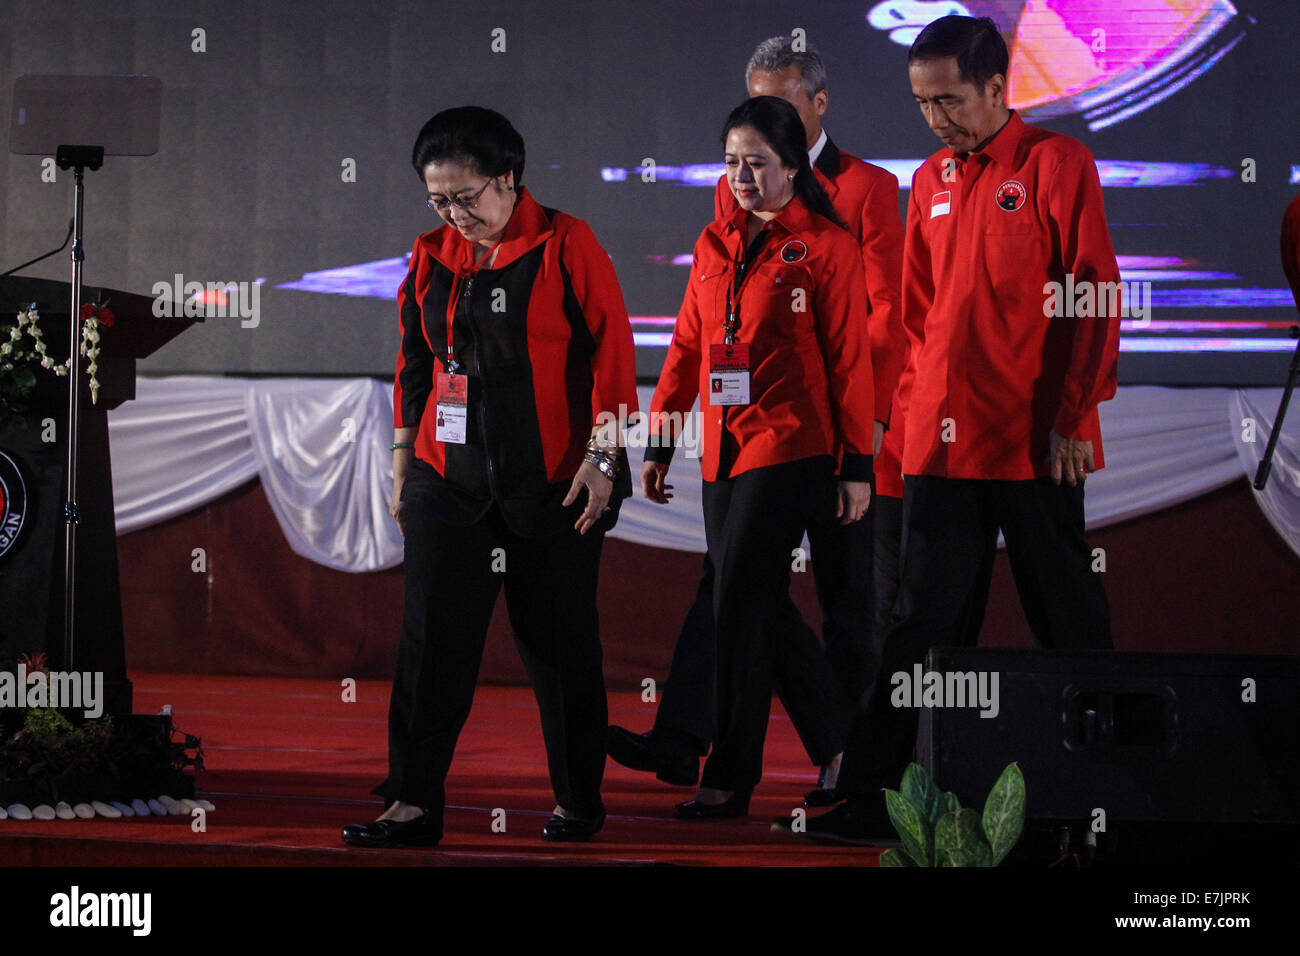 Semarang, Indonesia. 19th September, 2014. Former president and chairperson of Indonesian Democratic Party of Struggle (PDI-P) Megawati Sukarnoputri, chairman of PDI-P party who also the daughter of Megawati, Puan Maharani, and Indonesian president-elect Joko Widodo after opening ceremony the 4th national working meeting of PDI-P at Marina Convention Hall in Semarang, Central Java, Indonesia. The national meeting attended by 1,590 party cadres from all over Indonesia and take place from 19-21 September 2014. Credit:  PACIFIC PRESS/Alamy Live News Stock Photo